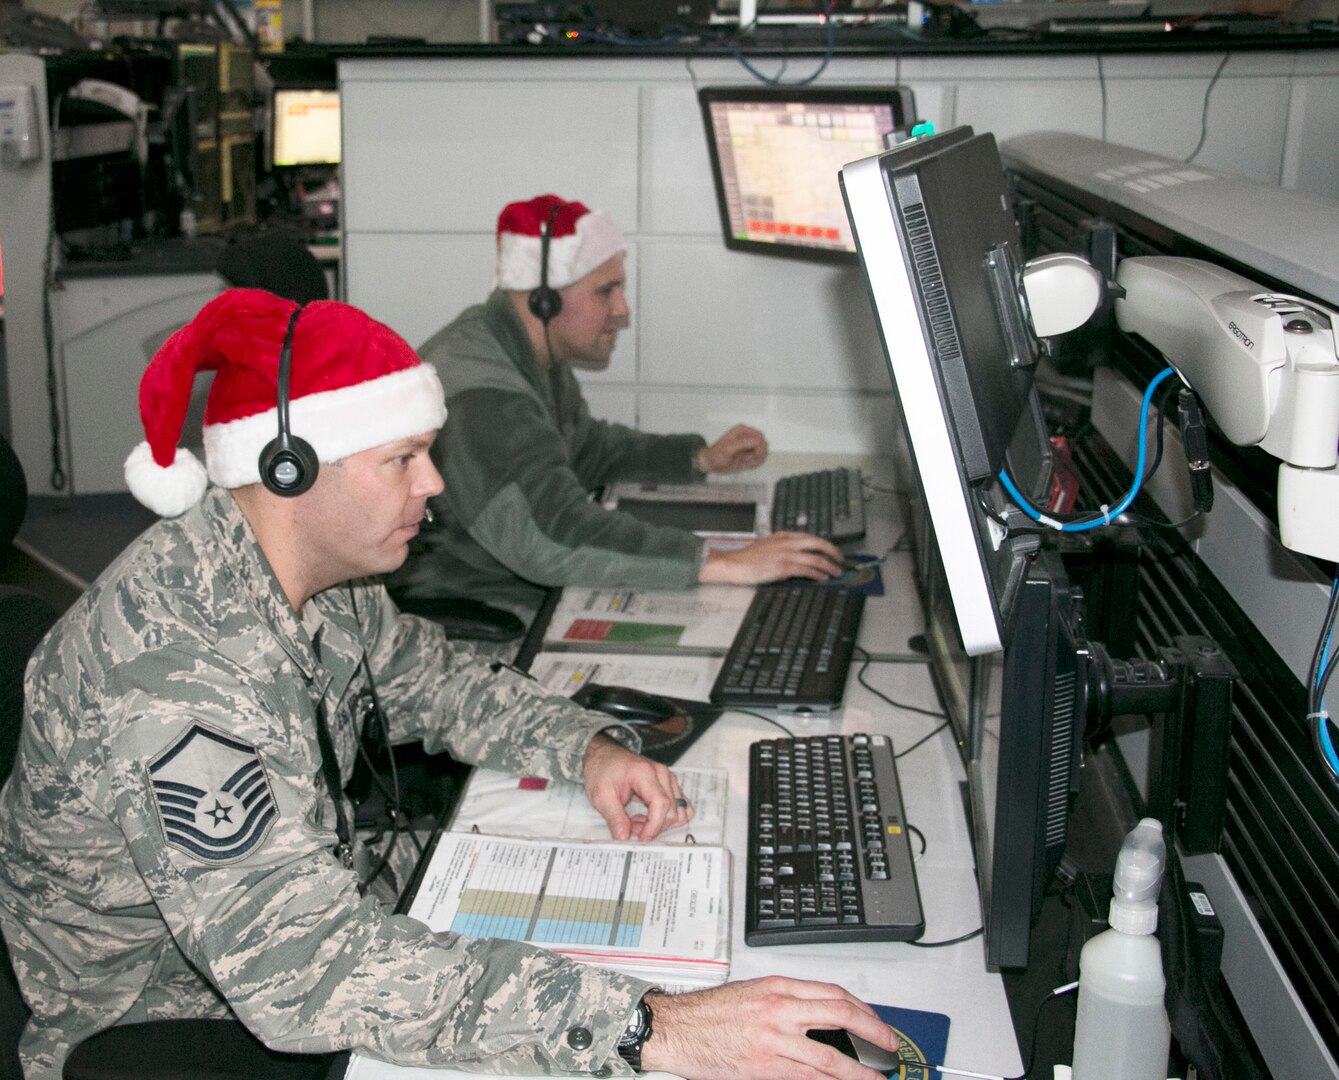 New York Air National Guards Master Sgt. Shane Reid, front, and Tech. Sgt. Brady King, both of the 224th Air Defense Squadron, train for upcoming Santa tracking operations at the Eastern Air Defense Sector in Rome. A headquarters unit of the North American Aerospace Defense Command (NORAD), EADS supports the NORAD Tracks Santa operation every year.